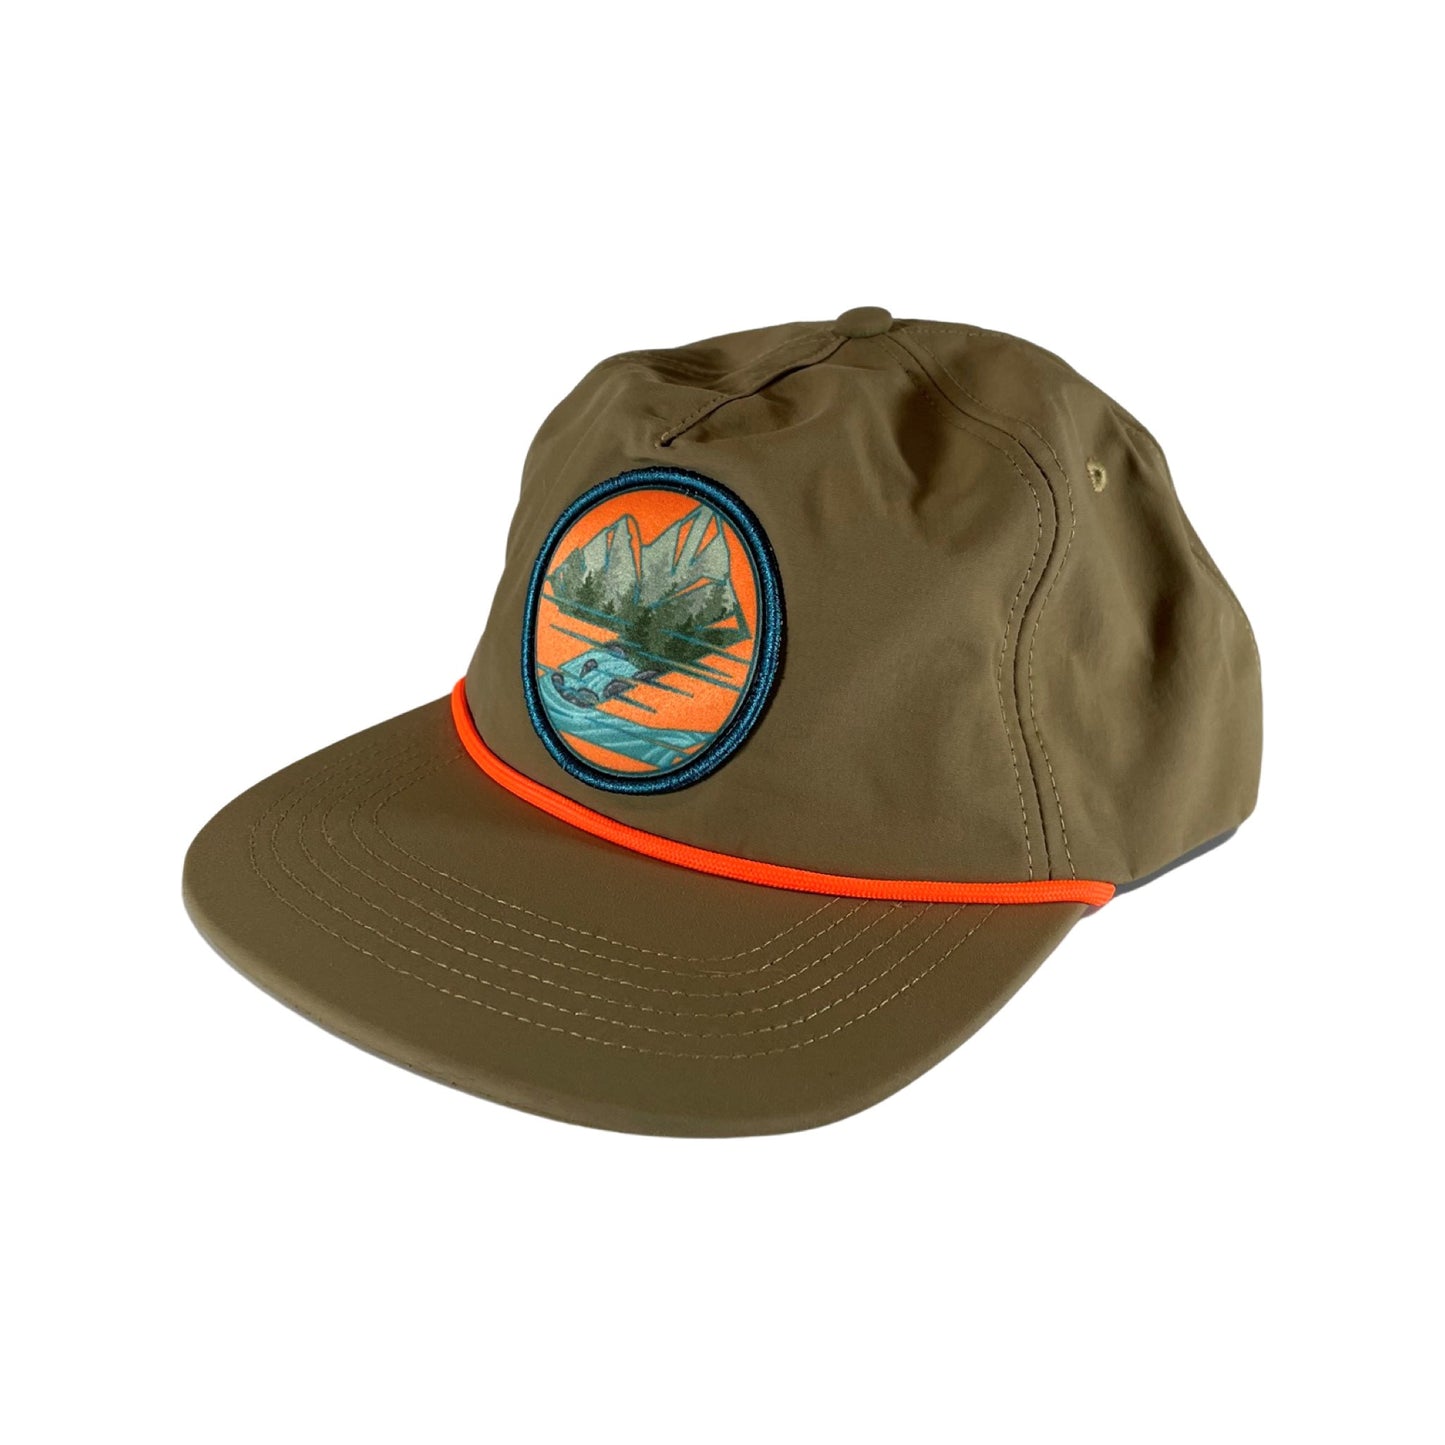 Backcountry Skinz Retro Snap Back - Dry Fit Hat